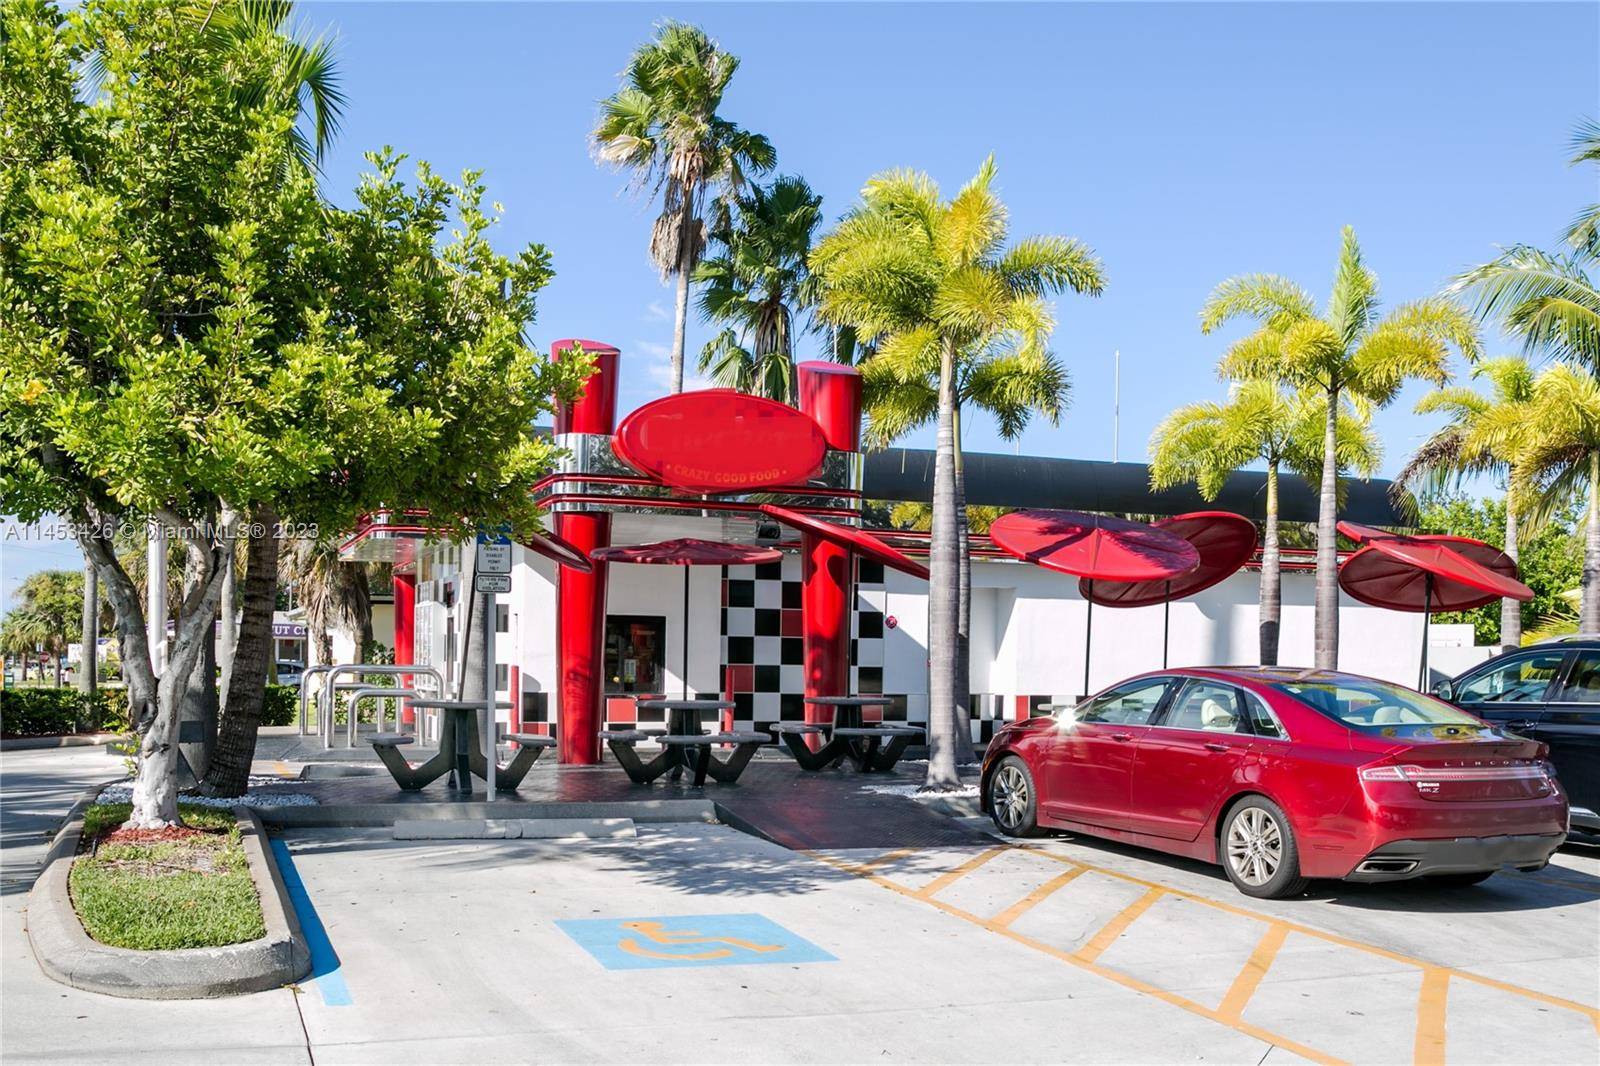 Quick Service Restaurant site building former Checkers located in the heart of Fort Pierce.